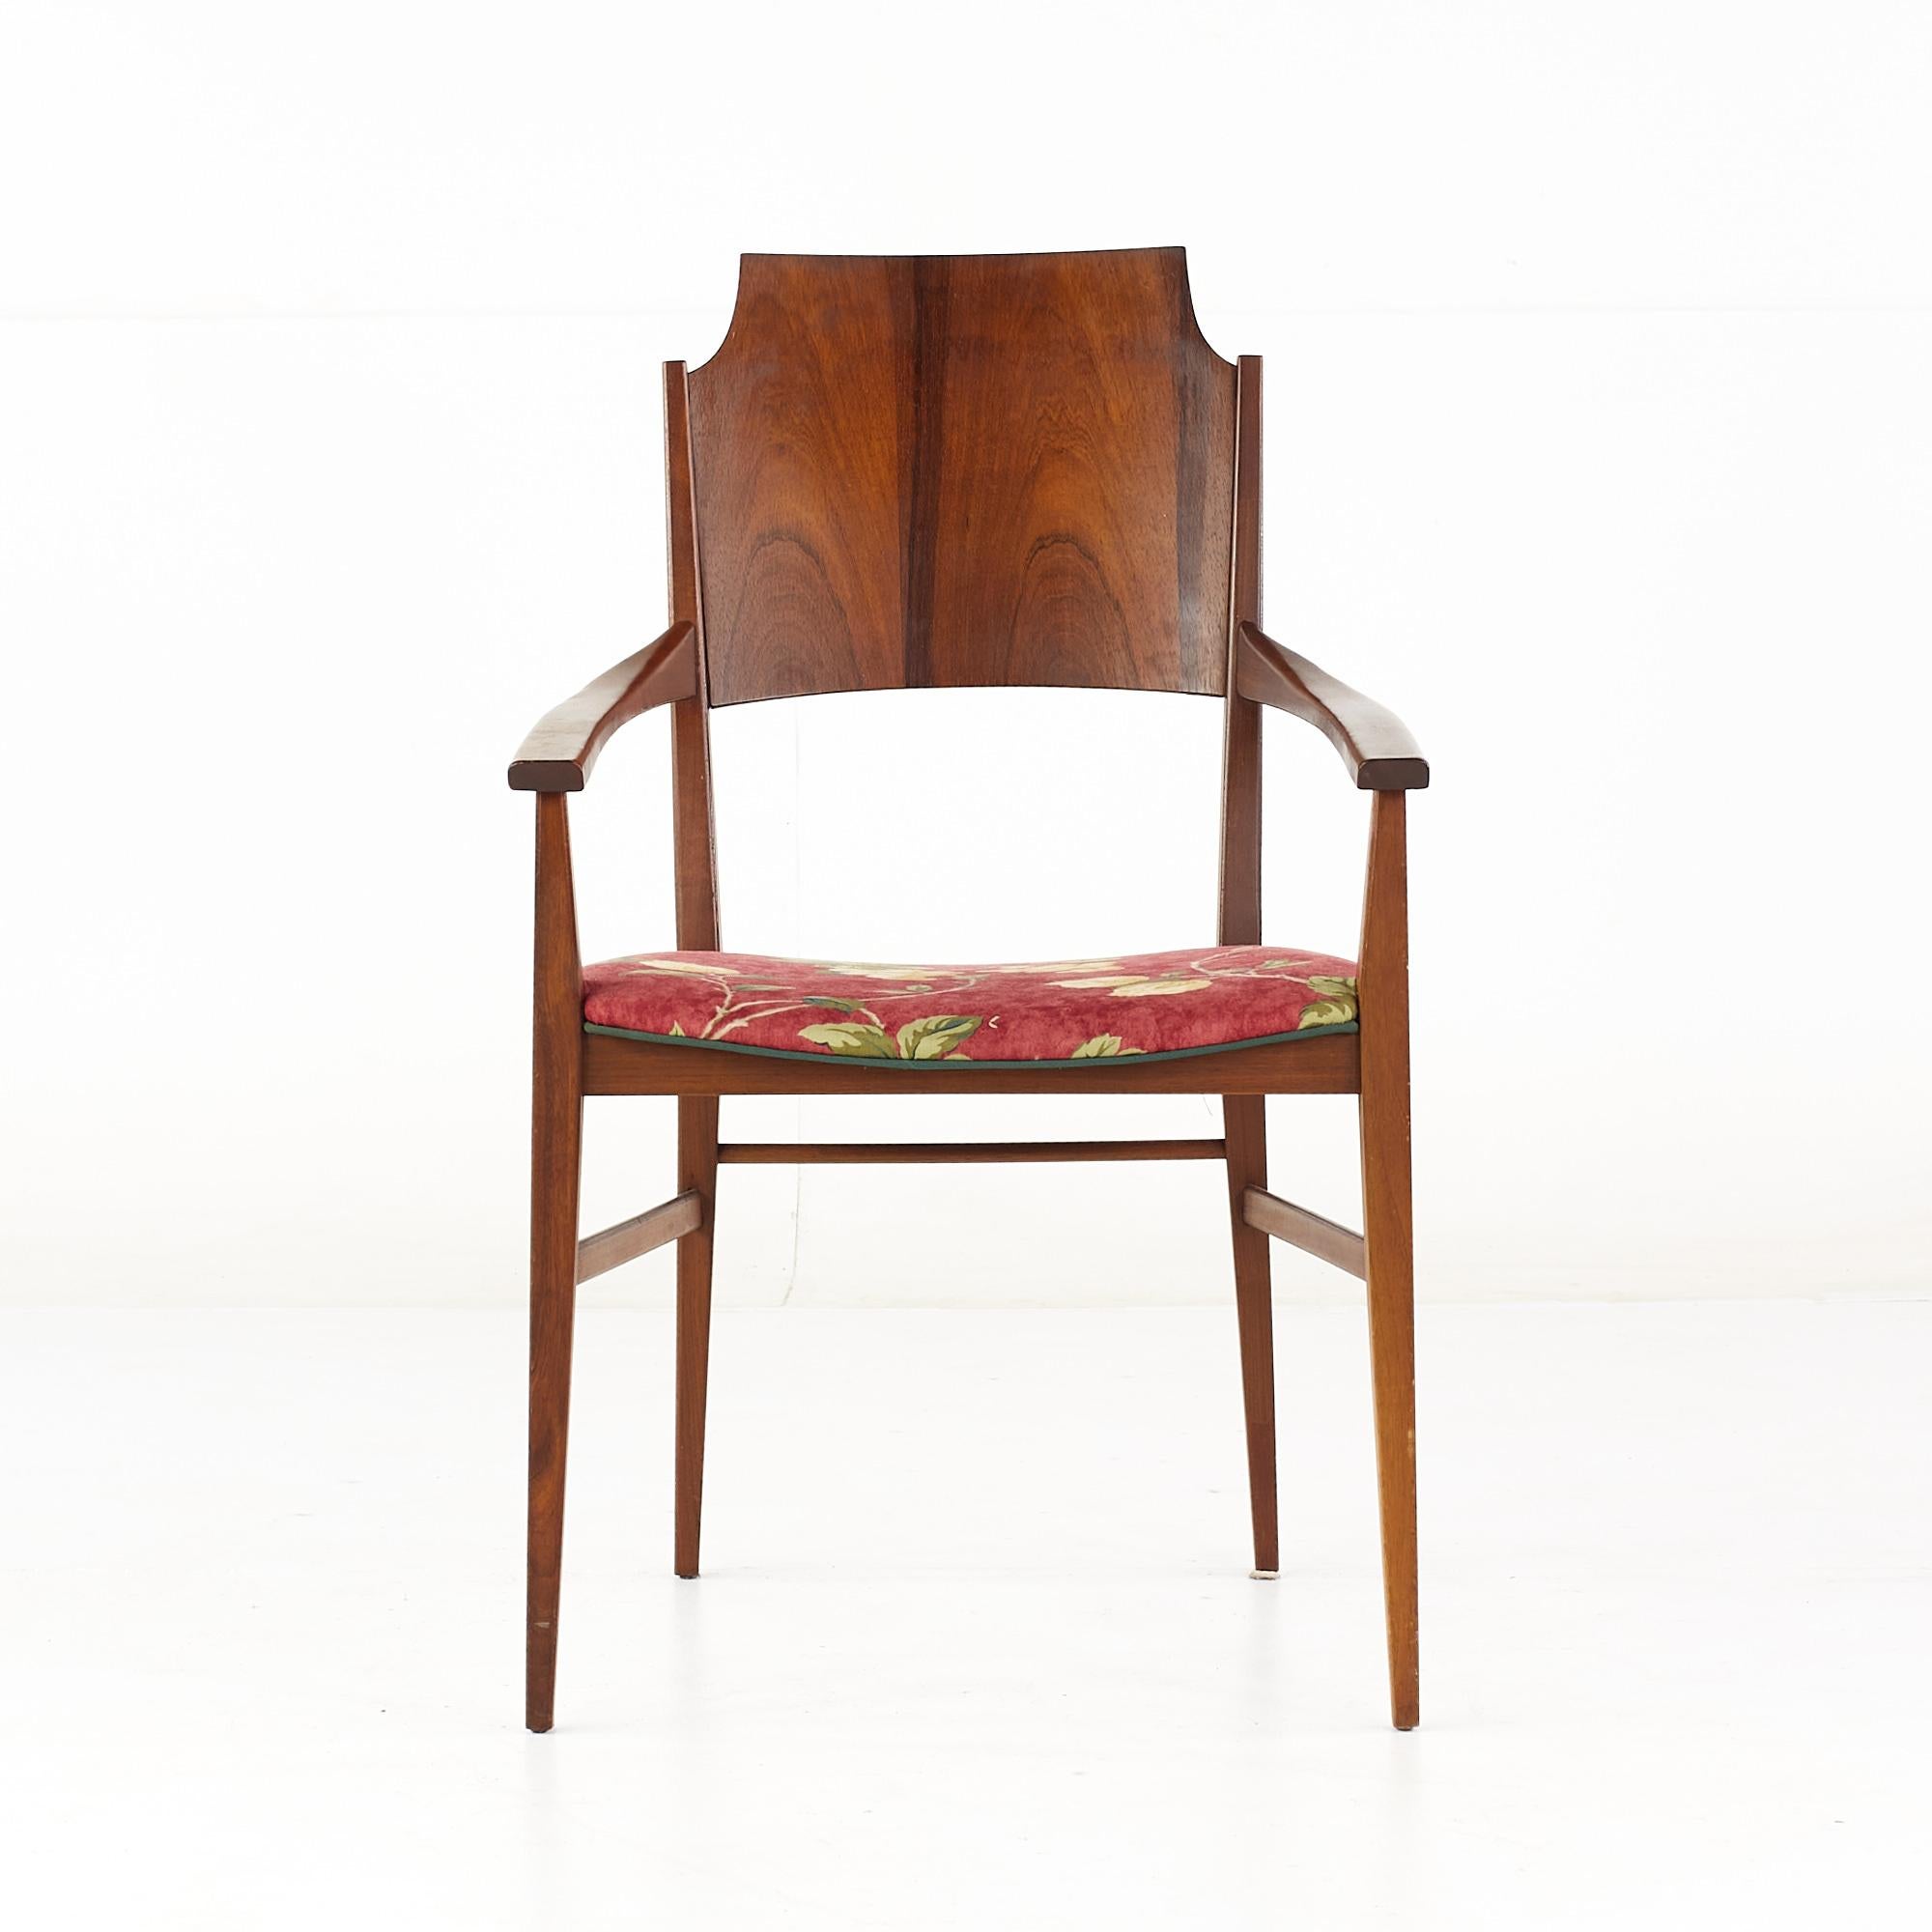 Paul McCobb for Lane Delineator Mid Century Rosewood Dining Chair

This chair measures: 22 wide x 19.5 deep x 36.75 inches high, with a seat height of 17.5 and arm height/chair clearance of 24.5 inches

All pieces of furniture can be had in what we